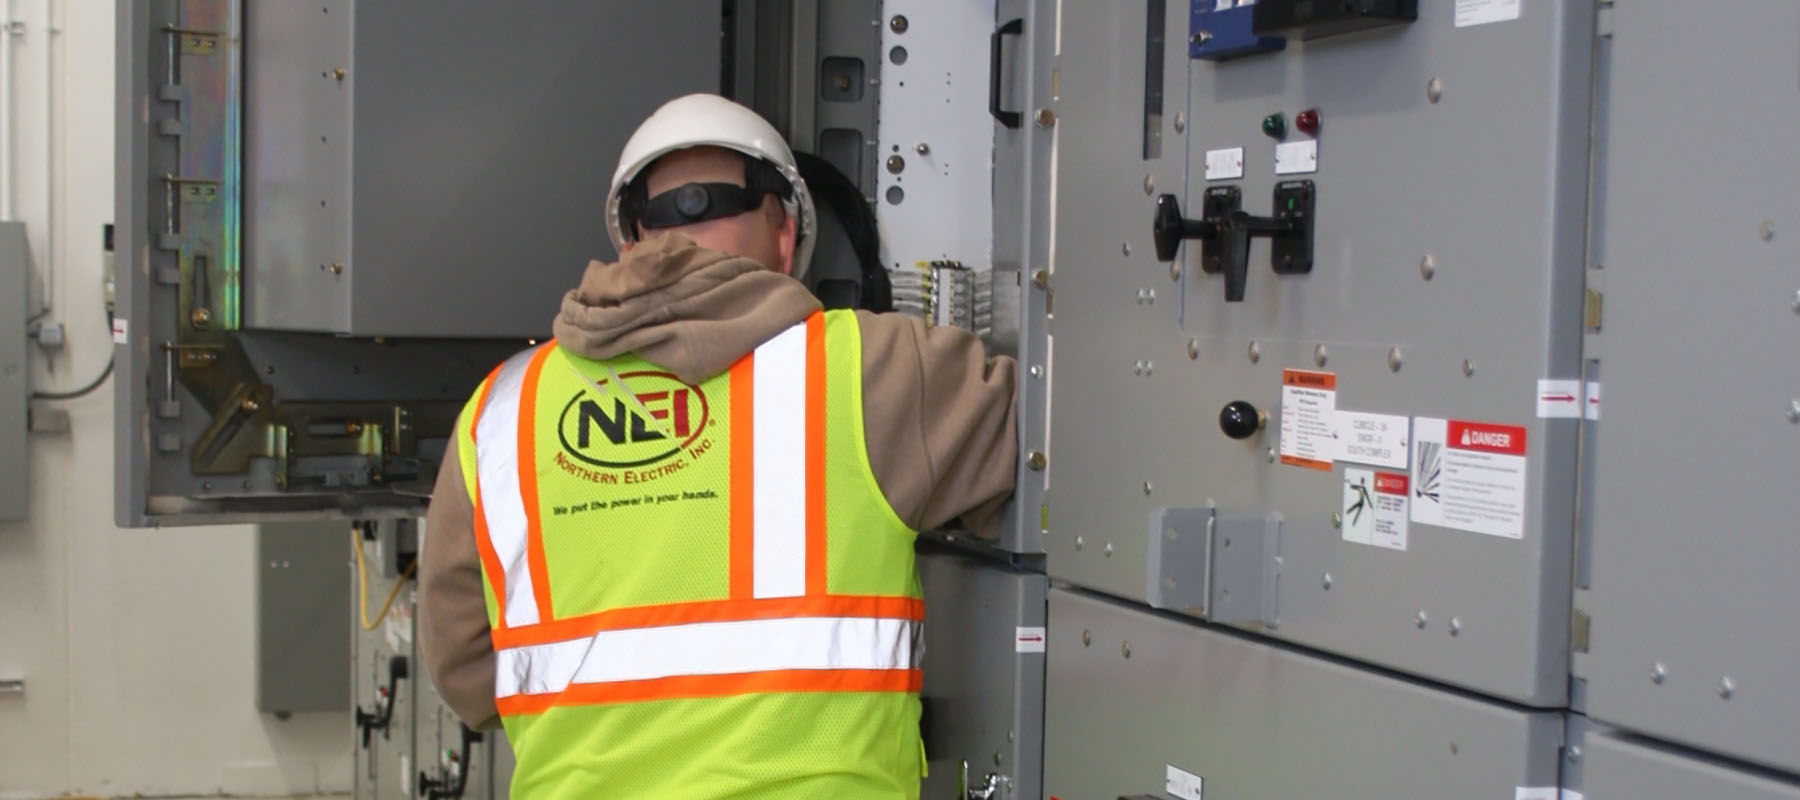 NEI electrician performing electrical maintenance at the Green Bay Metropolitan Sewerage District